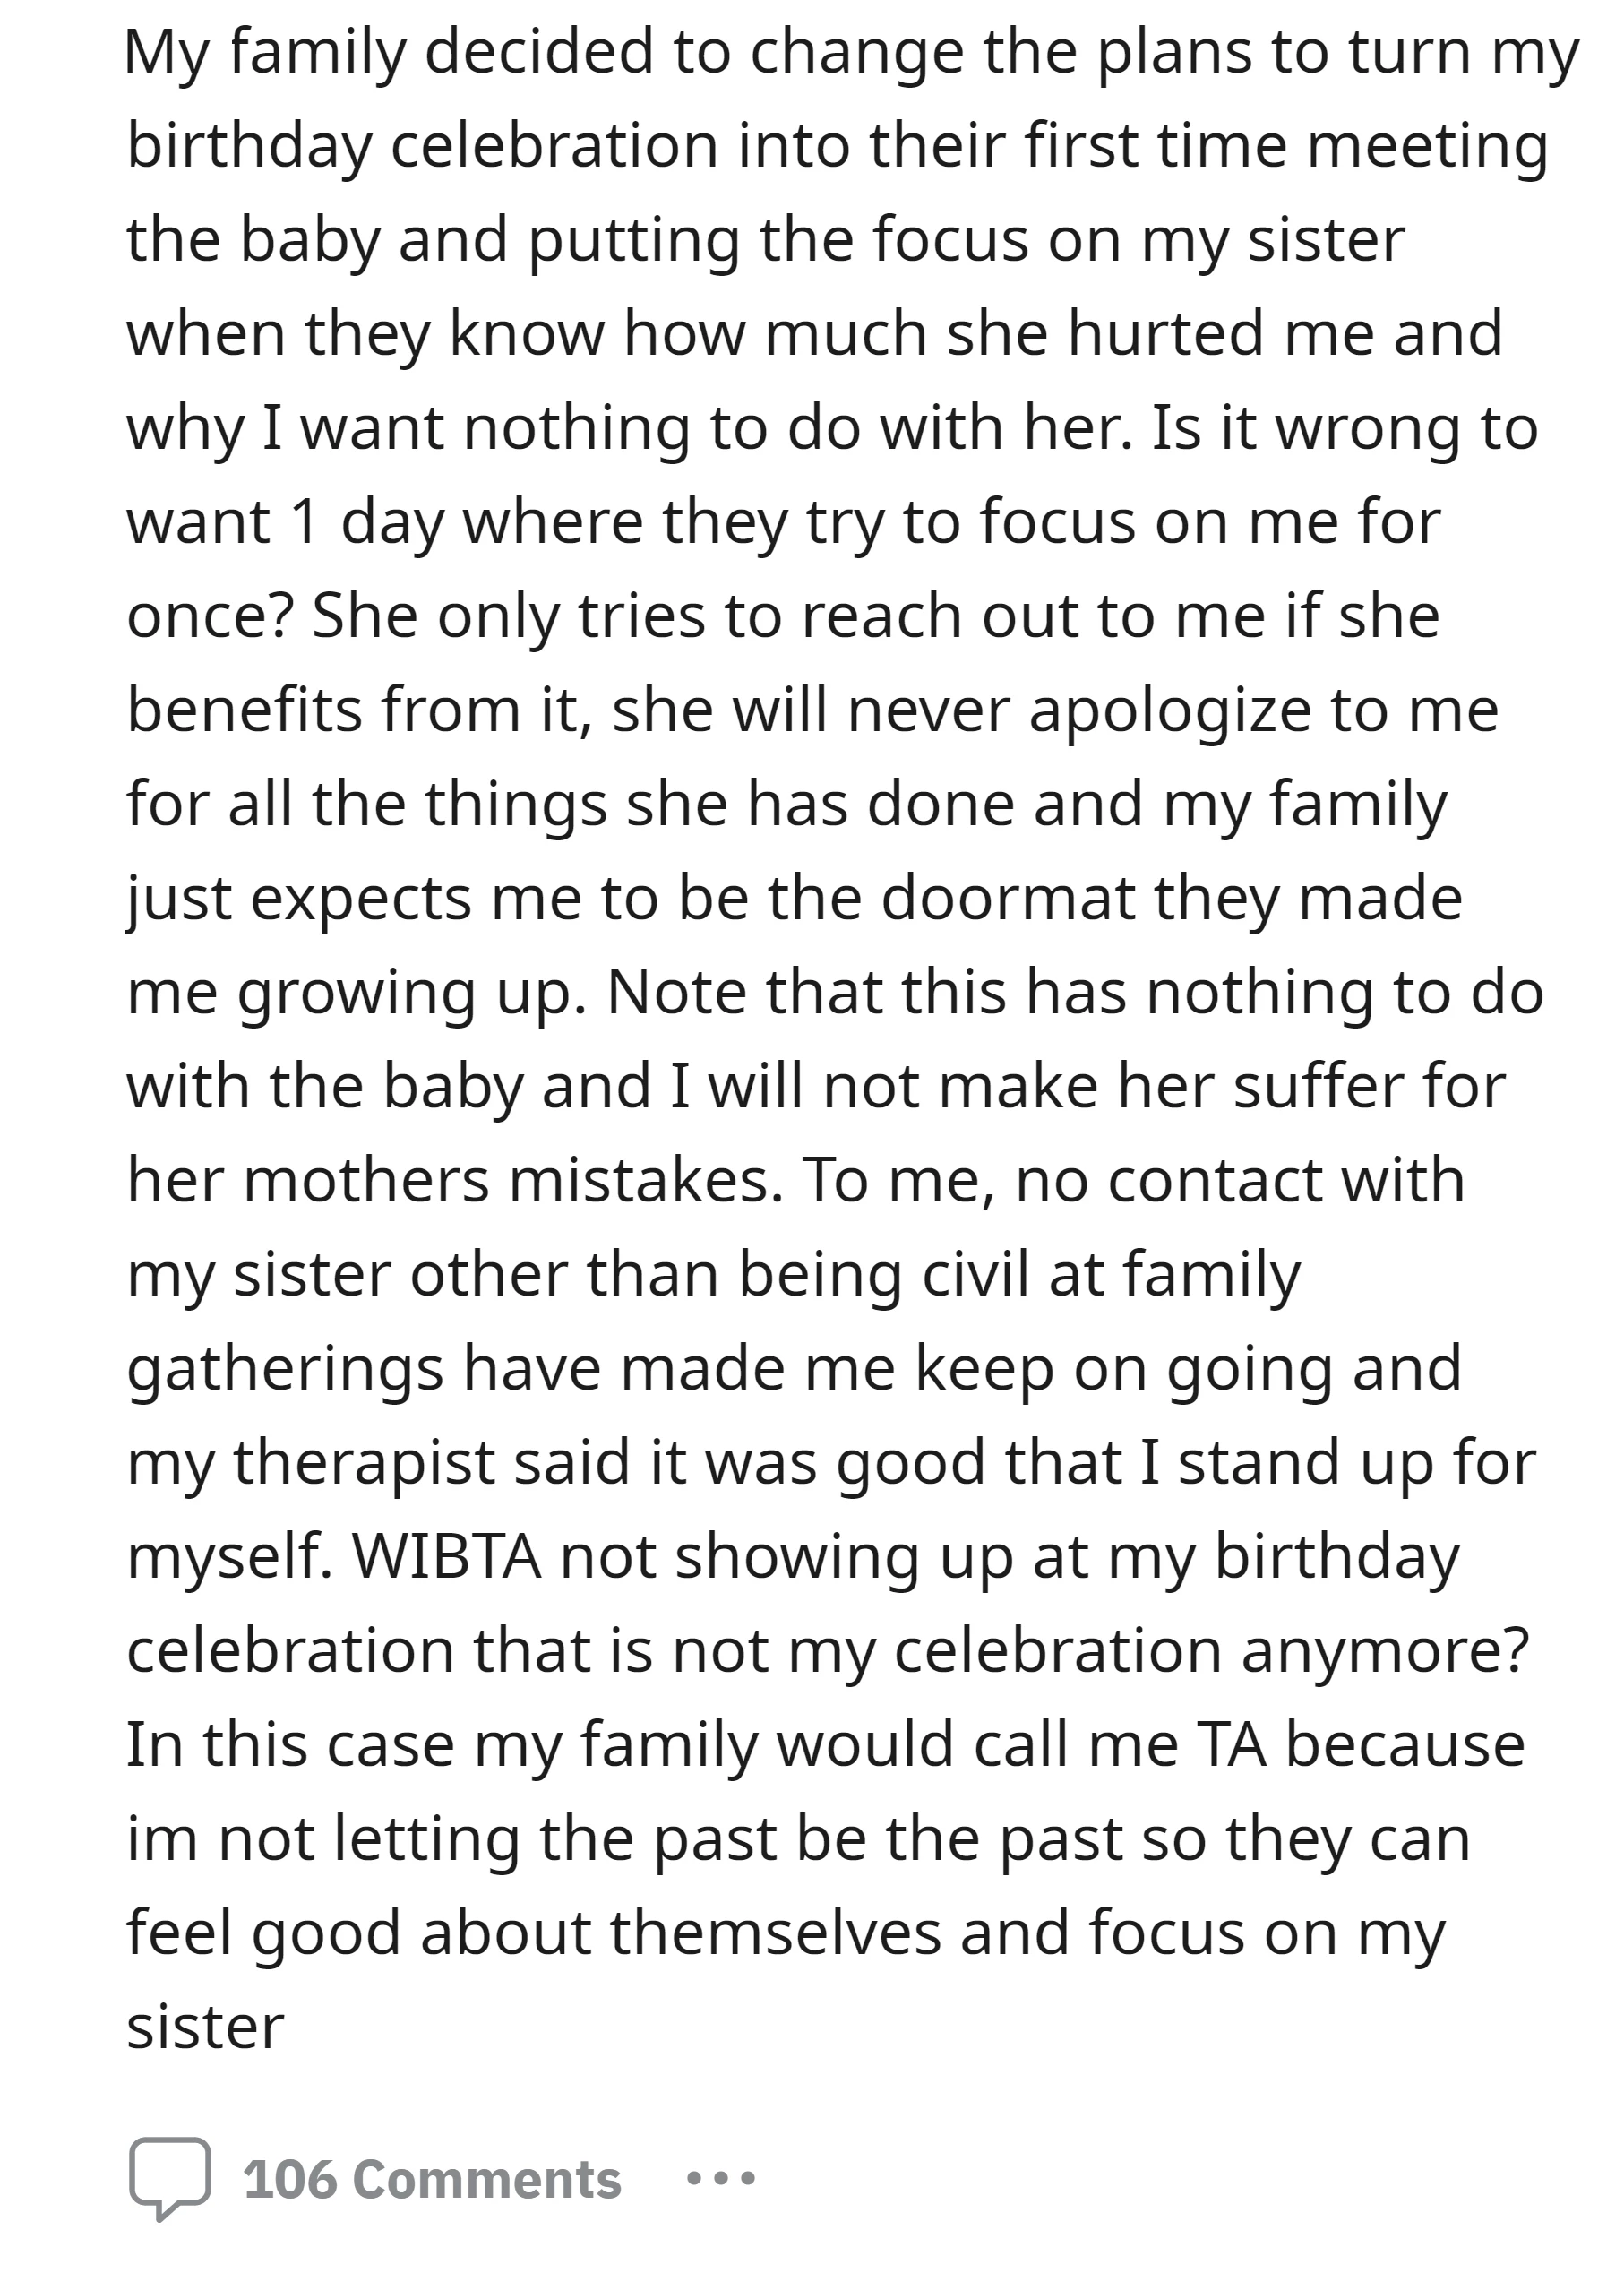 The OP feels hurt and unimportant as their family shifts the focus of their birthday celebration to meet their sister's new baby